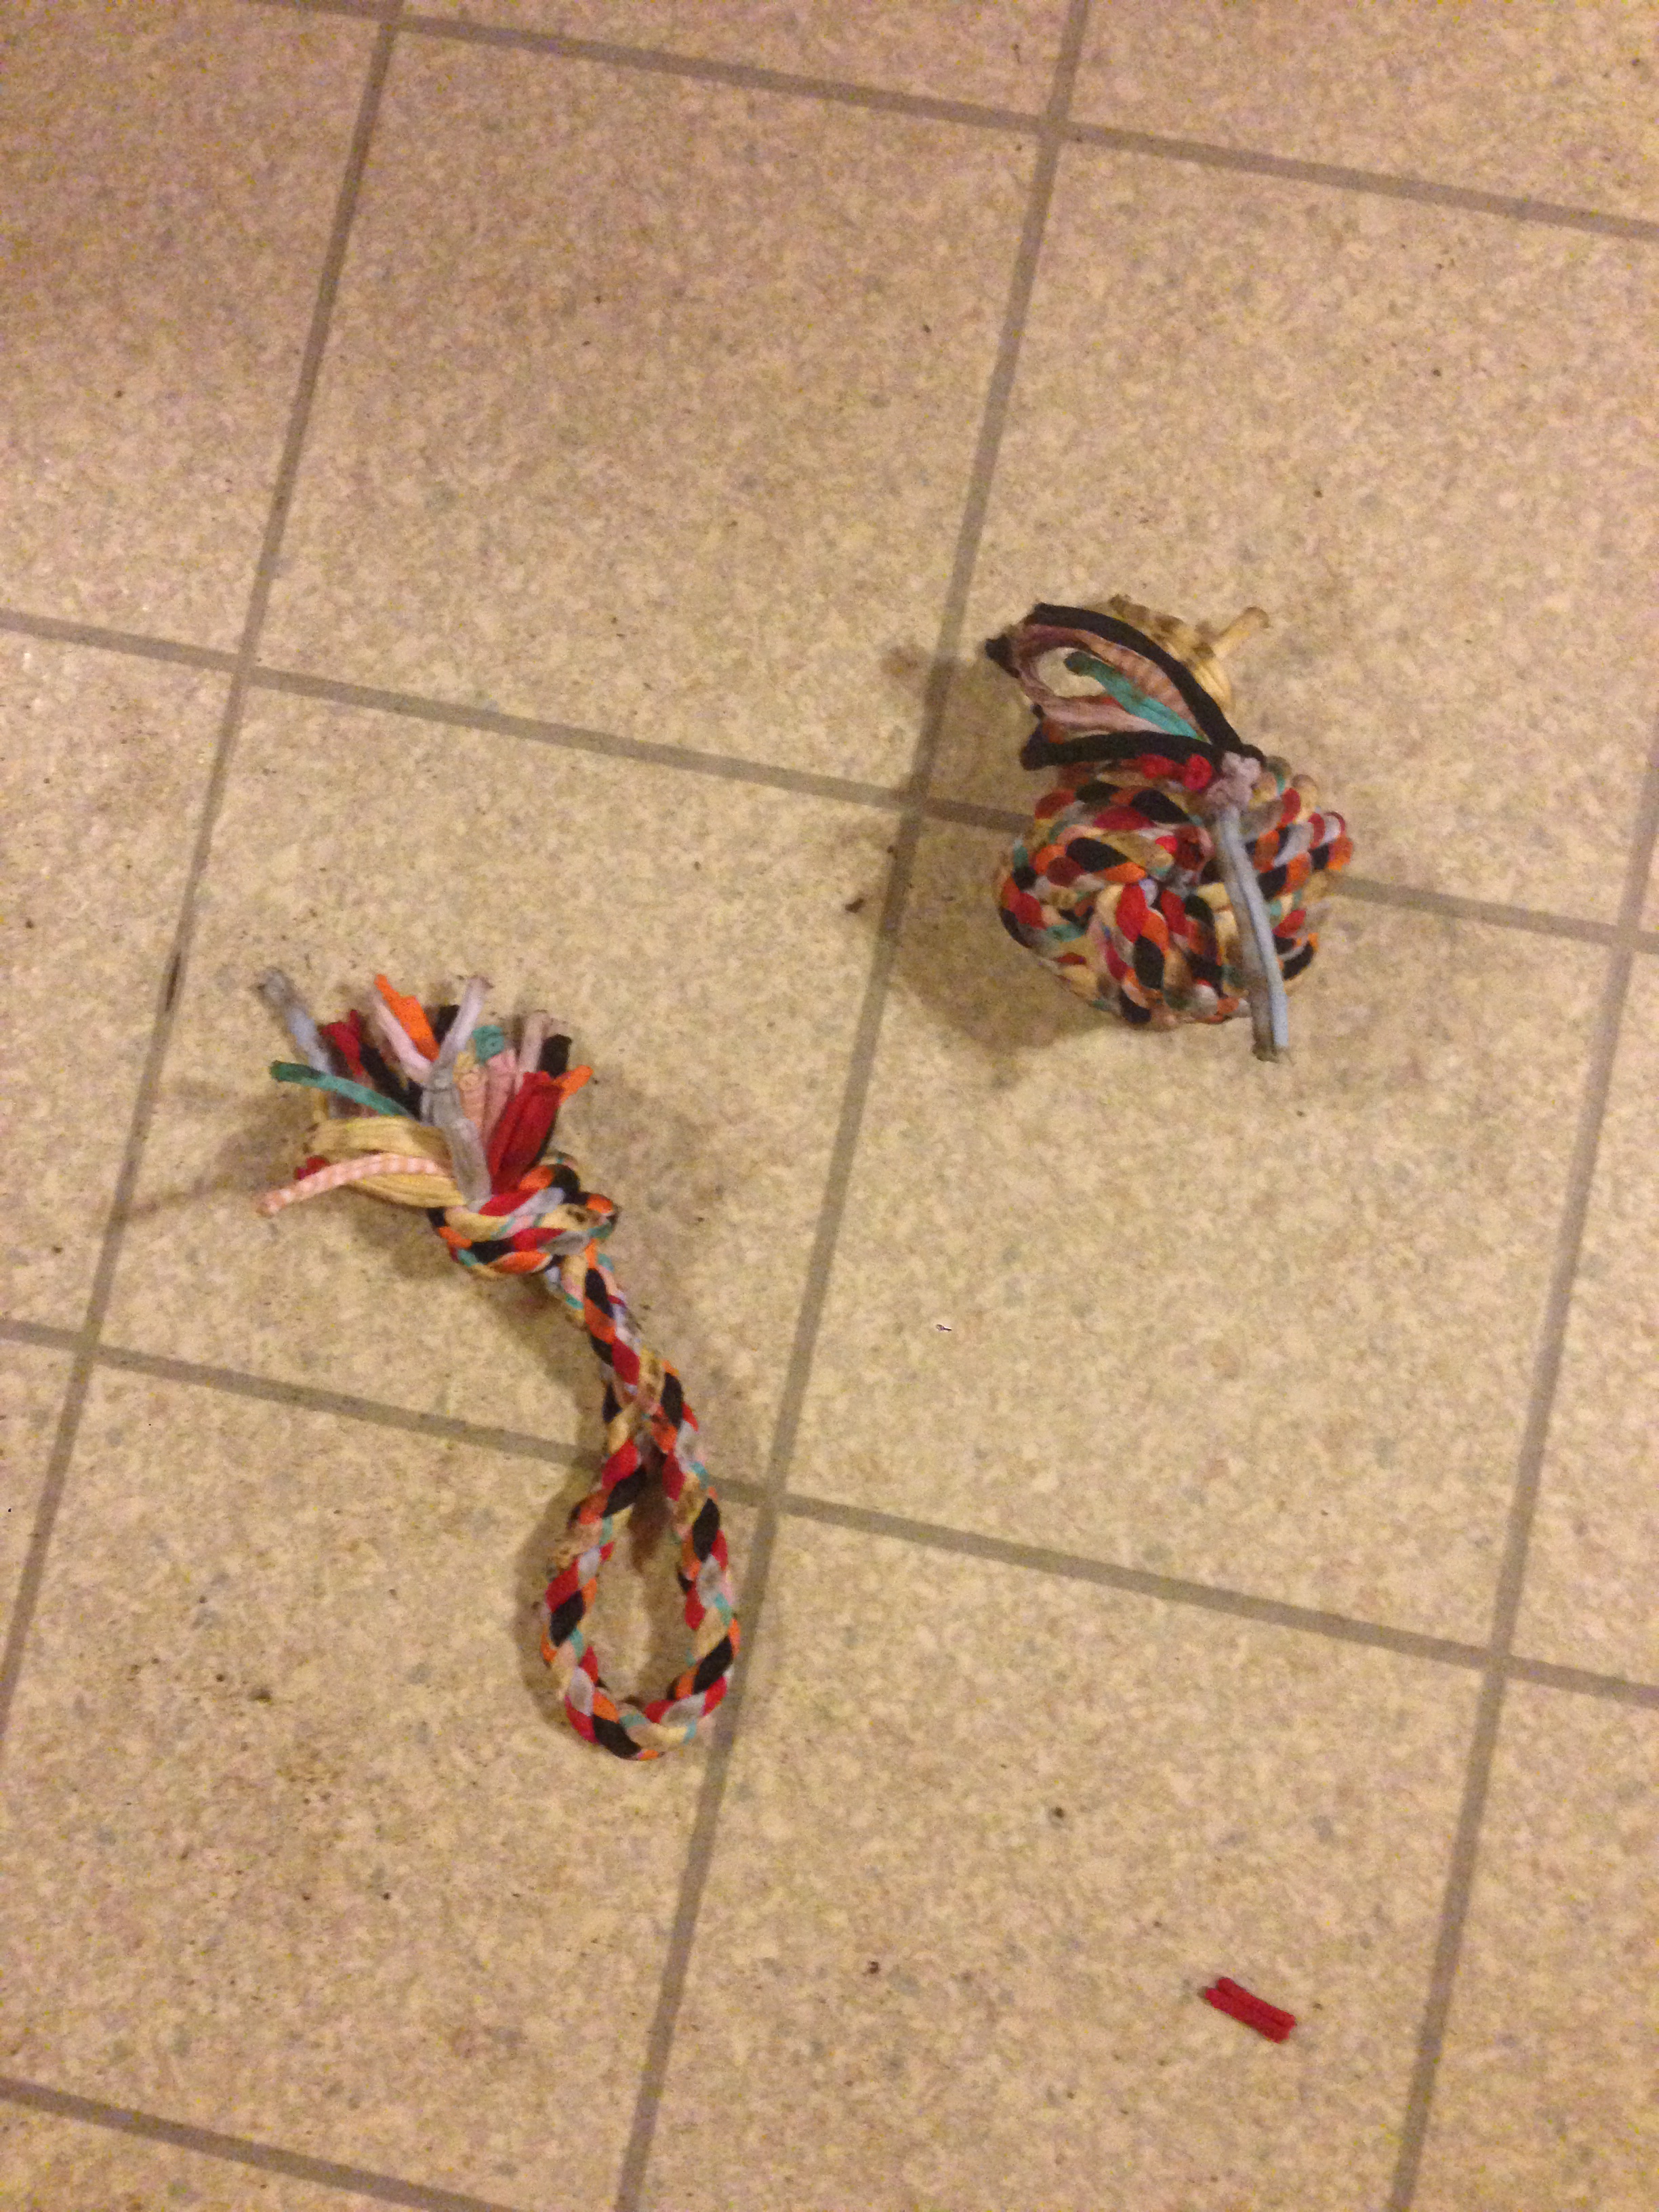 dog ate rope toy